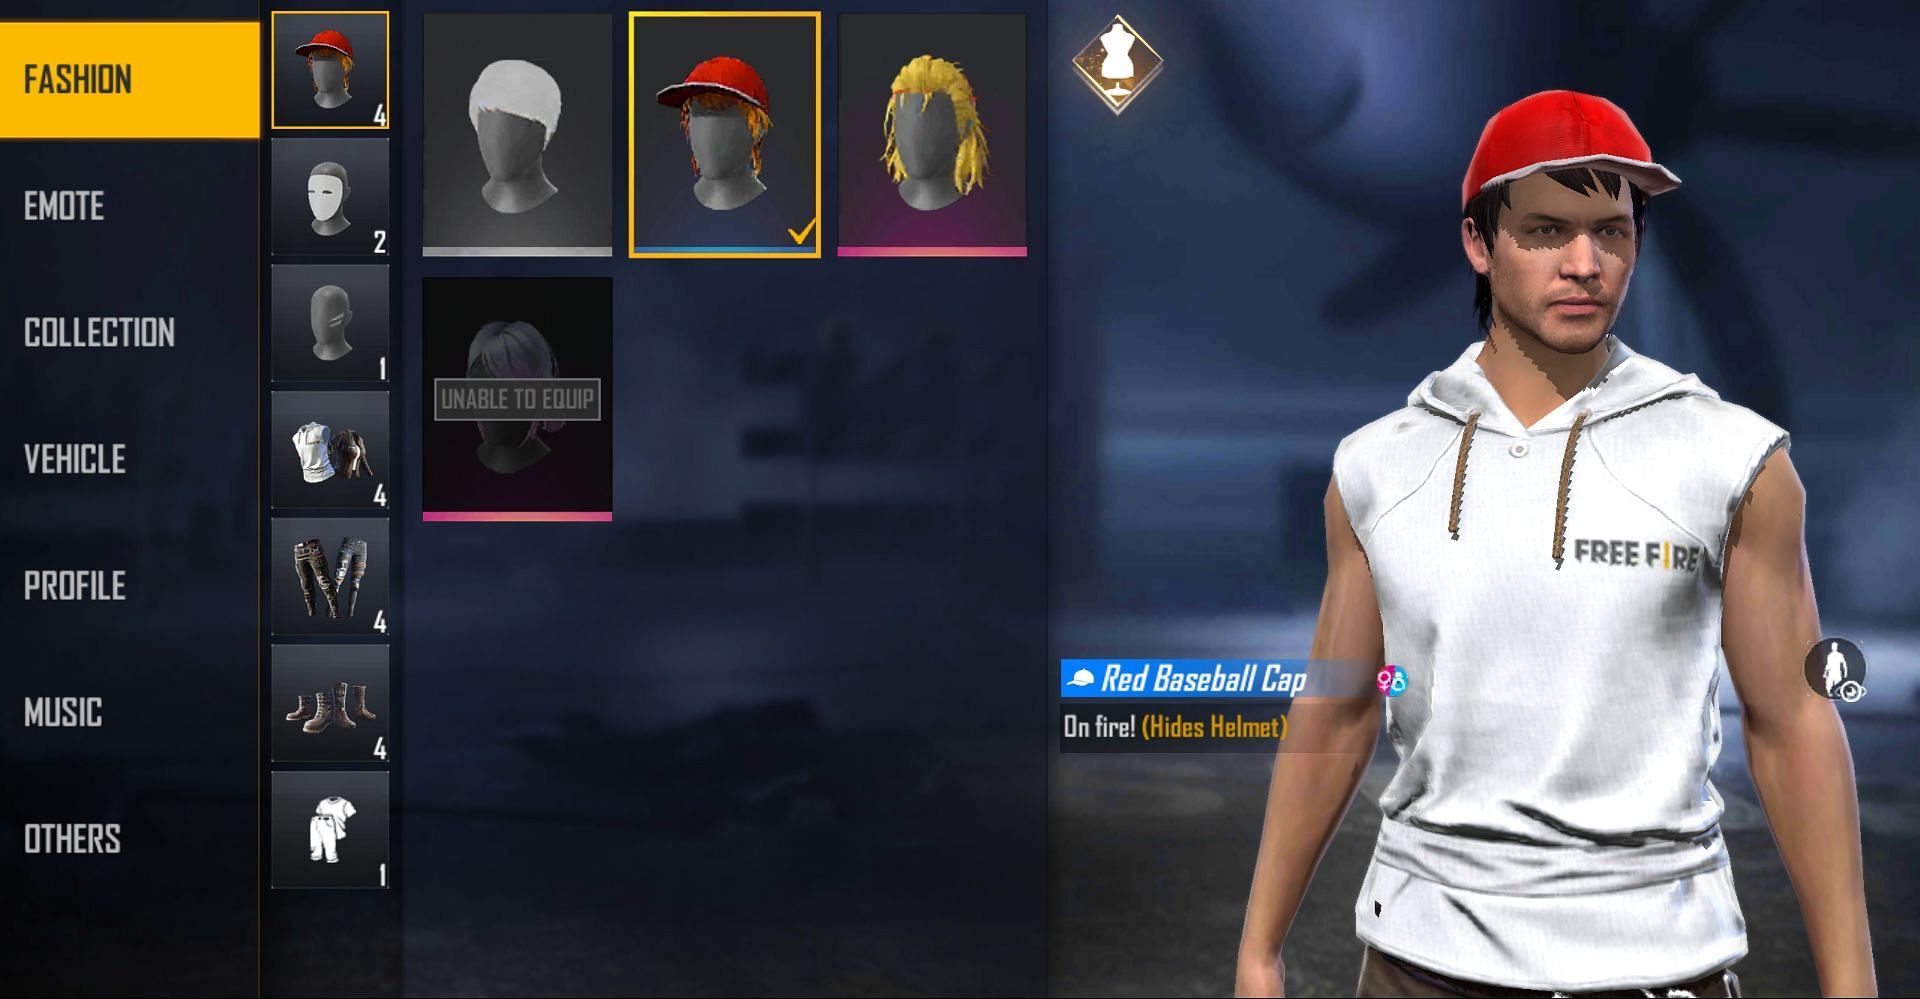 Red Baseball Cap was given to players in the Singapore server (Image via Garena)